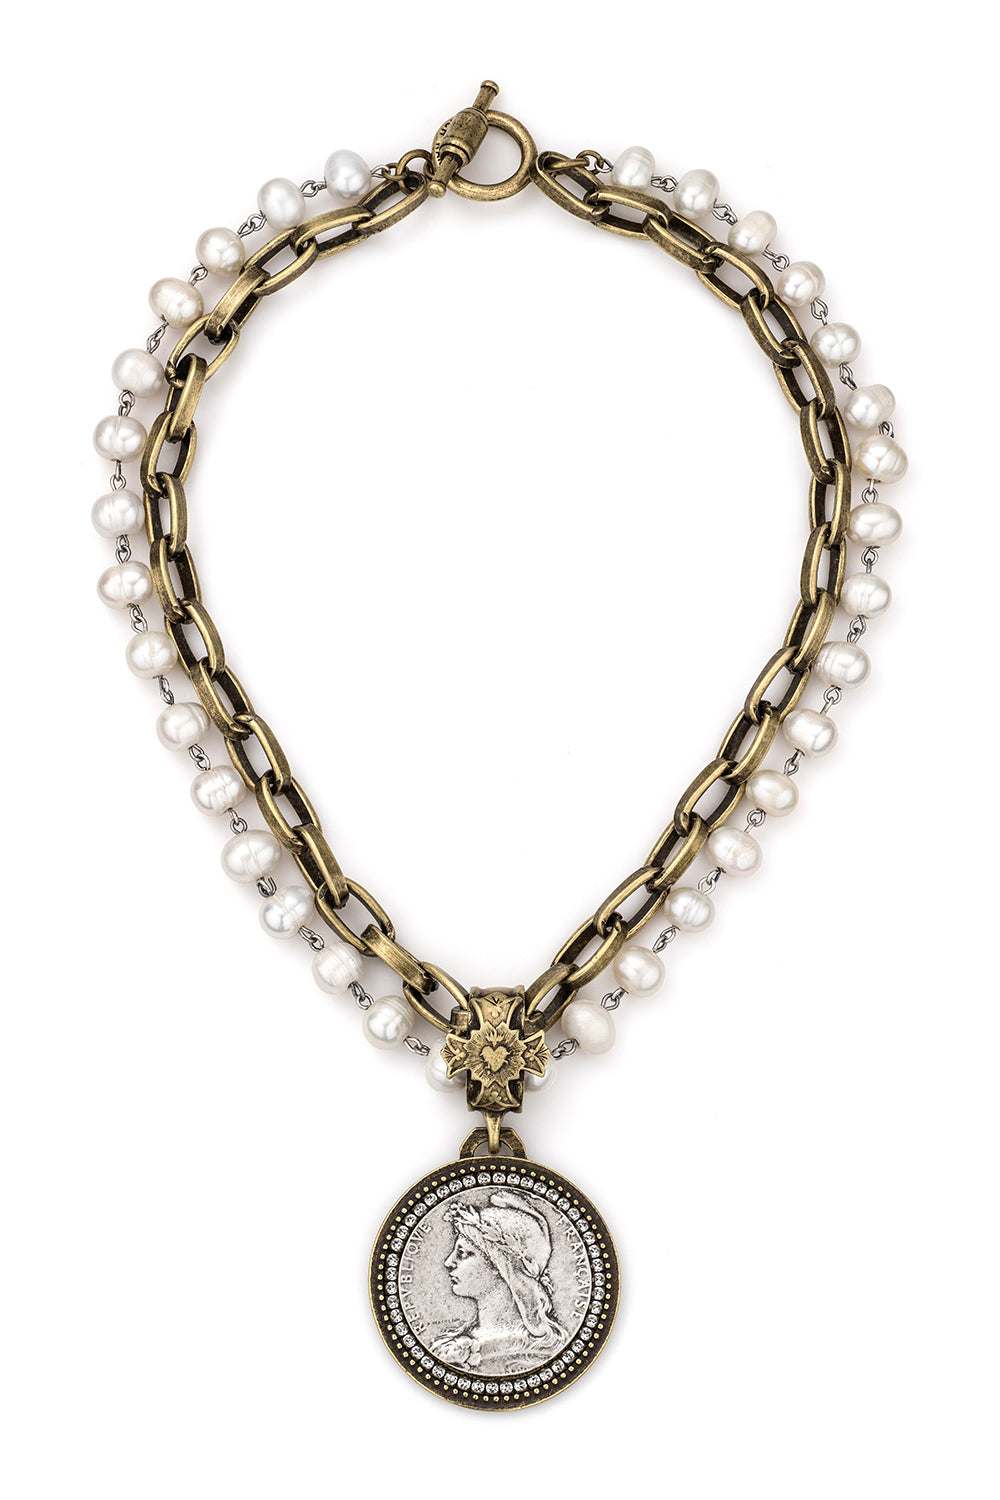 DOUBLE STRANDED PEARLS WITH SILVER WIRE, LYON CHAIN AND CHEMINS MEDALLION AND AUSTRIAN CRYSTAL